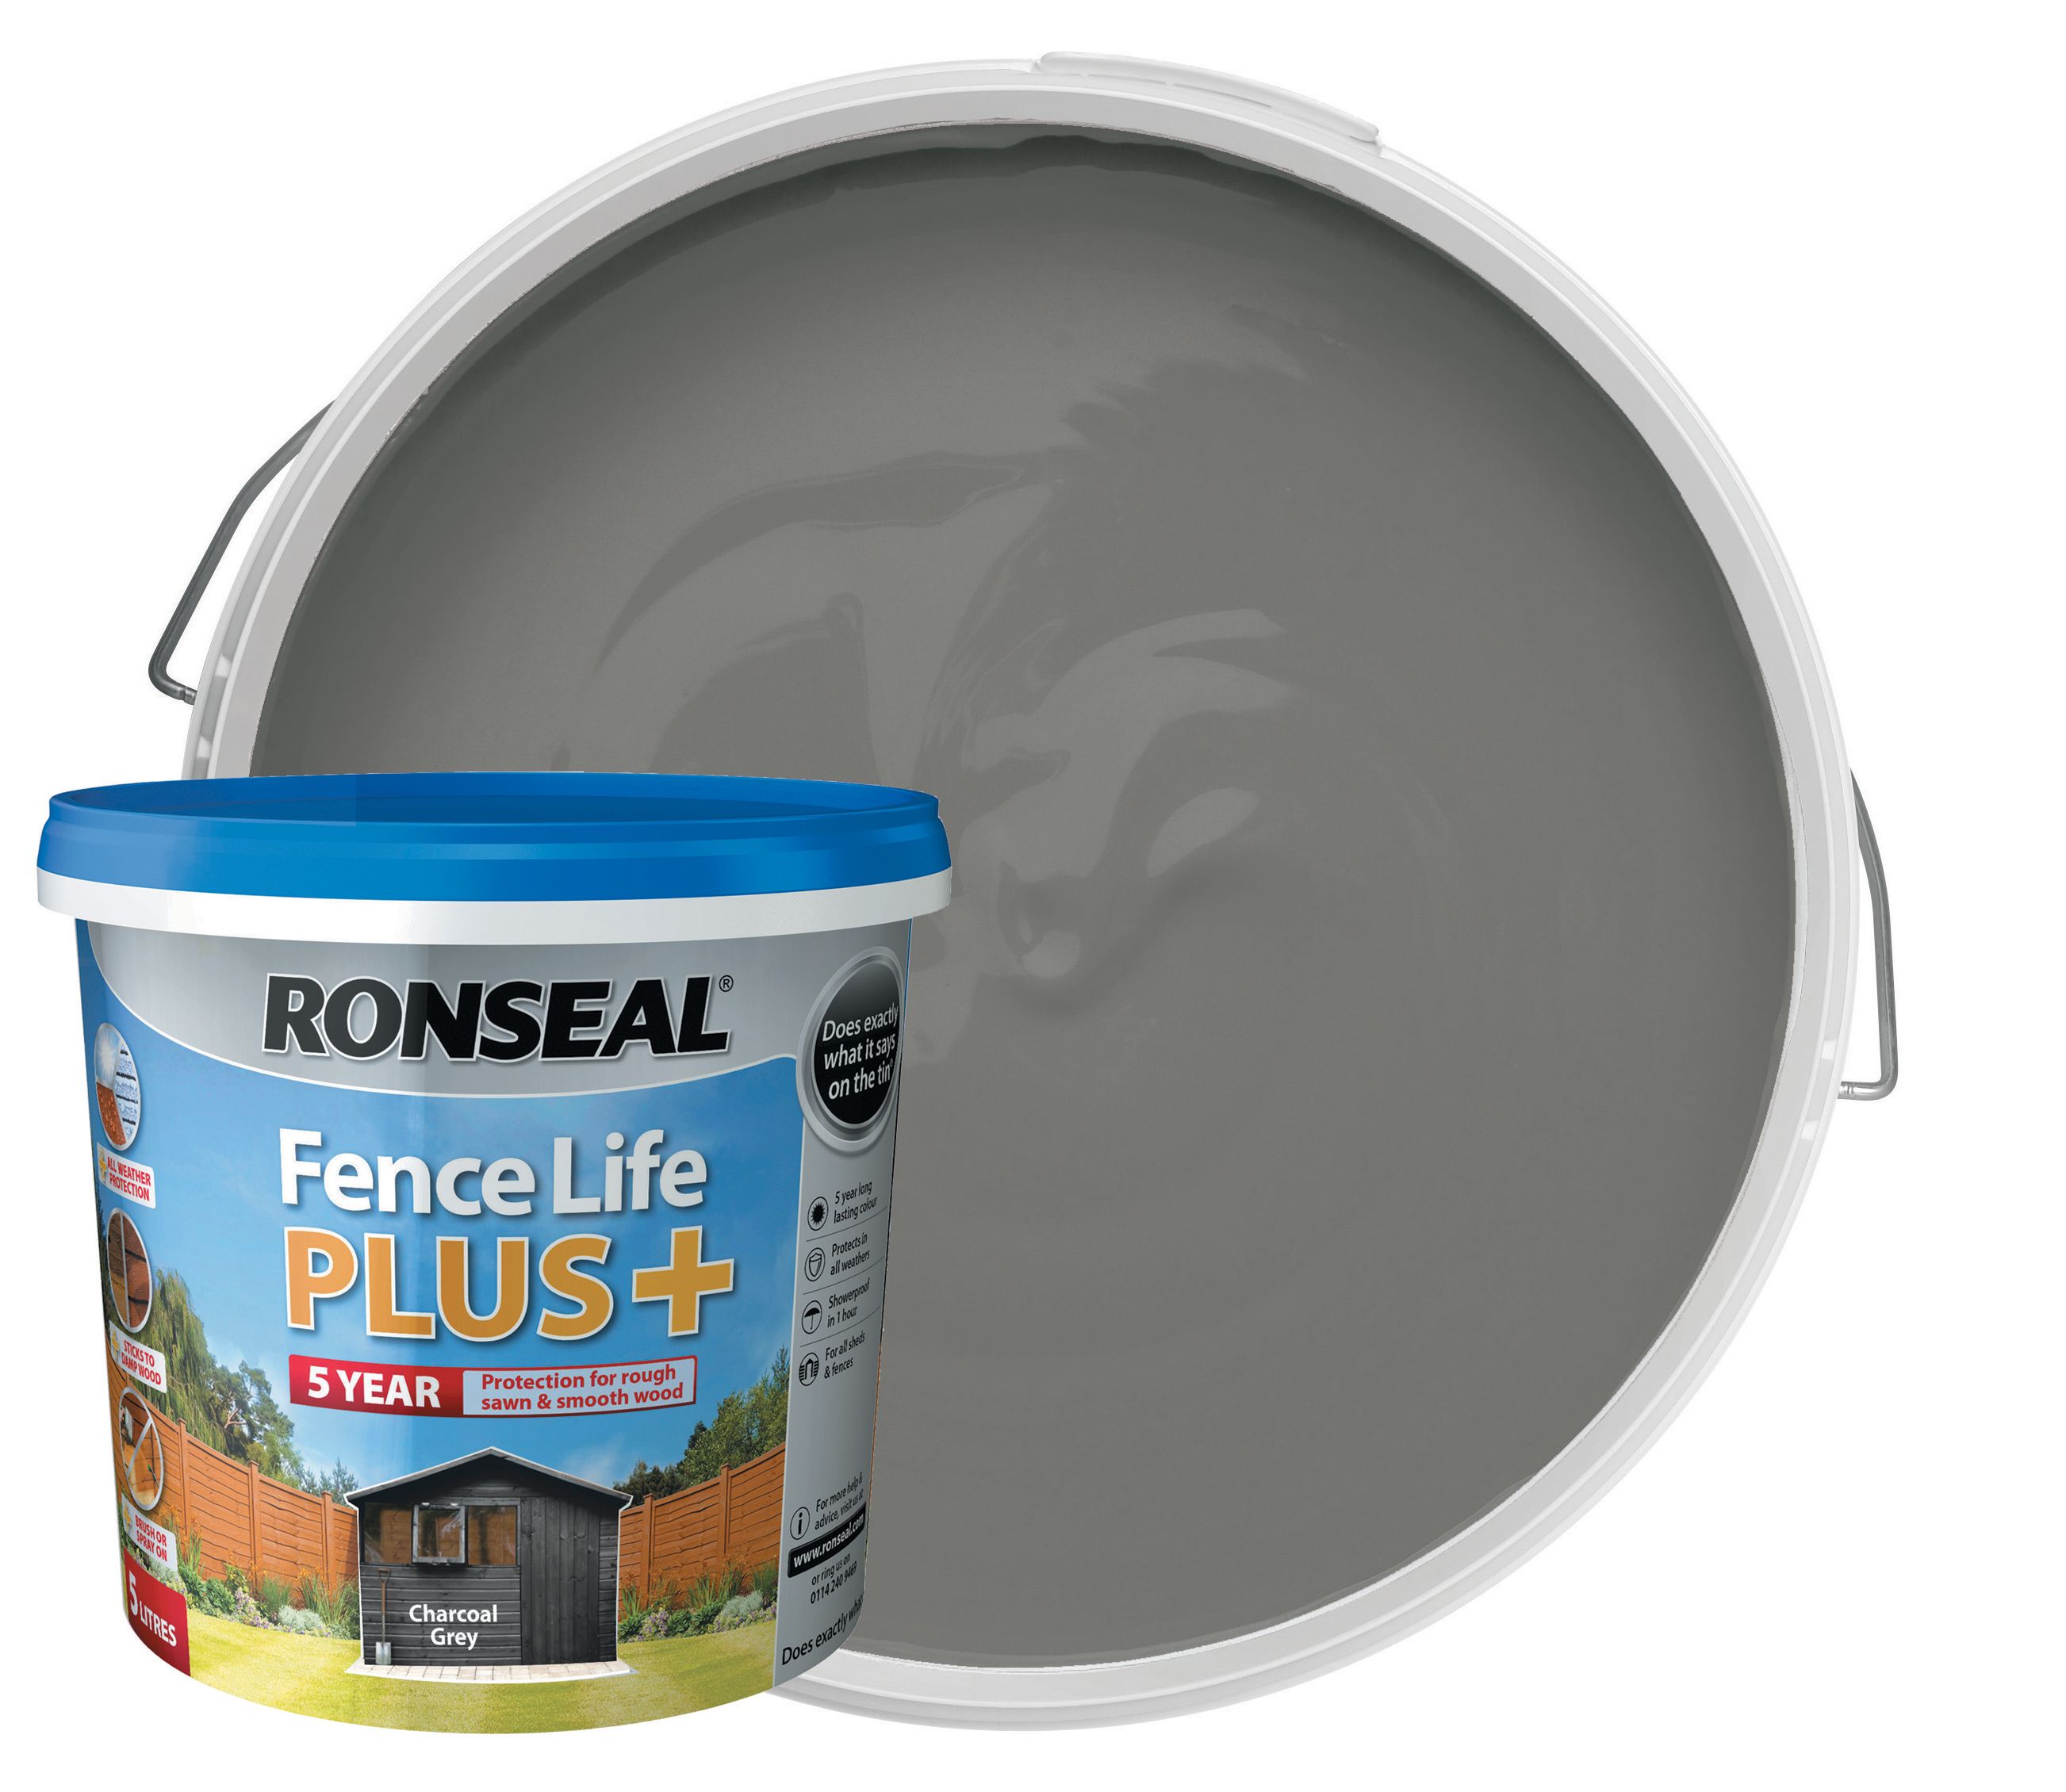 Ronseal Fence Life Plus Matt Shed & Fence Treatment - Charcoal Grey - 5L